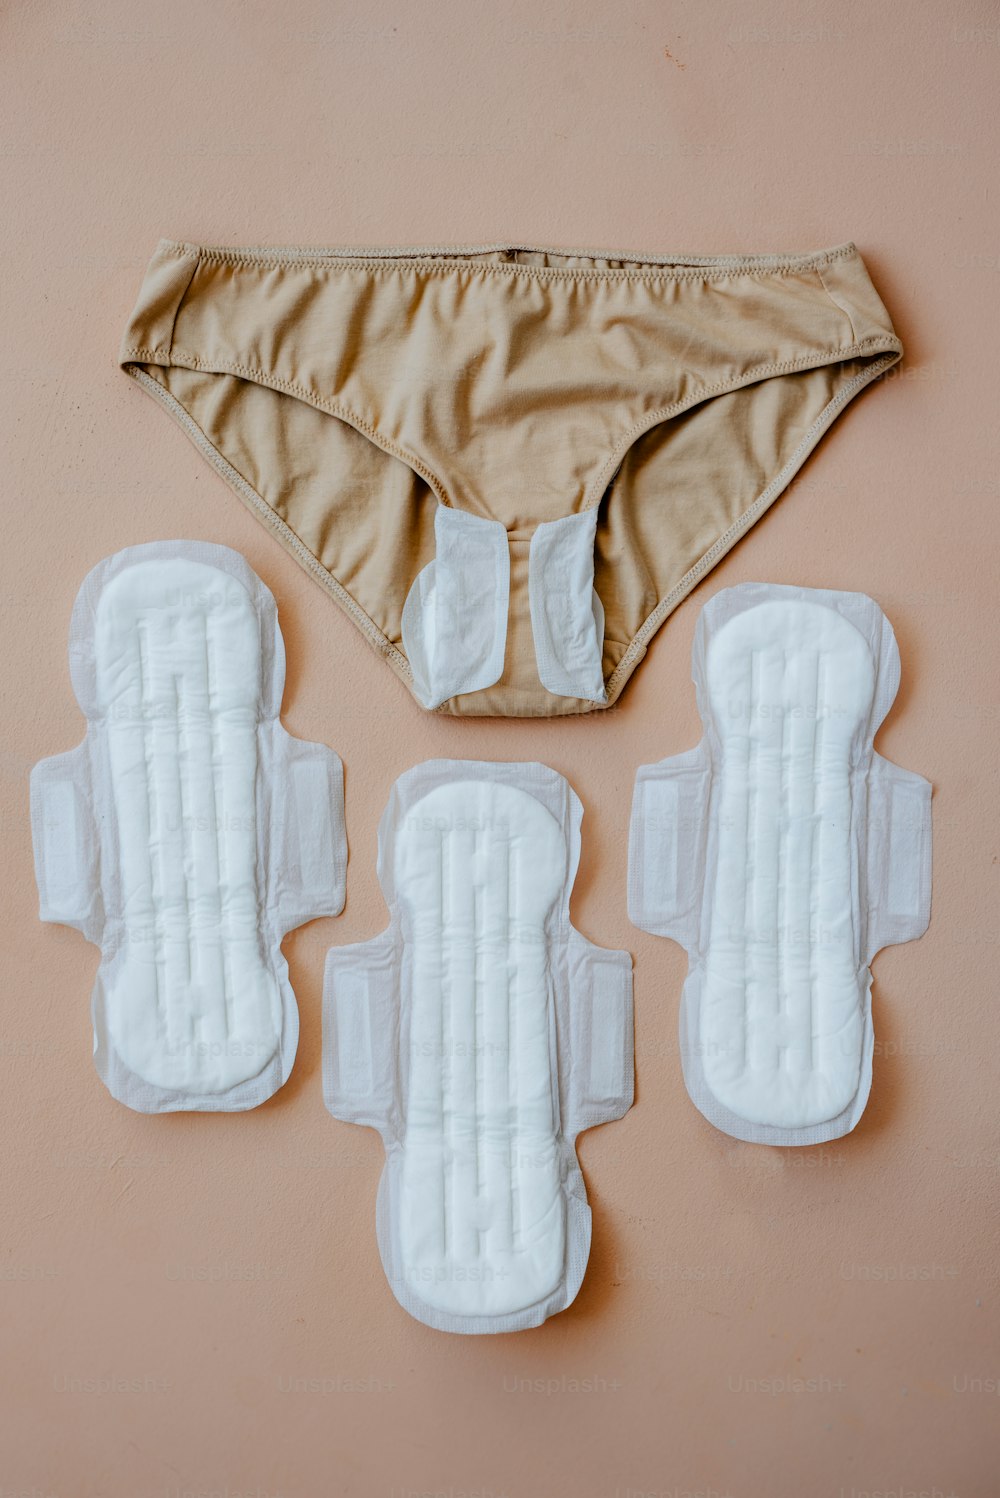 A pair of underwear and underwear pads on a pink surface photo – Sanitary  Image on Unsplash